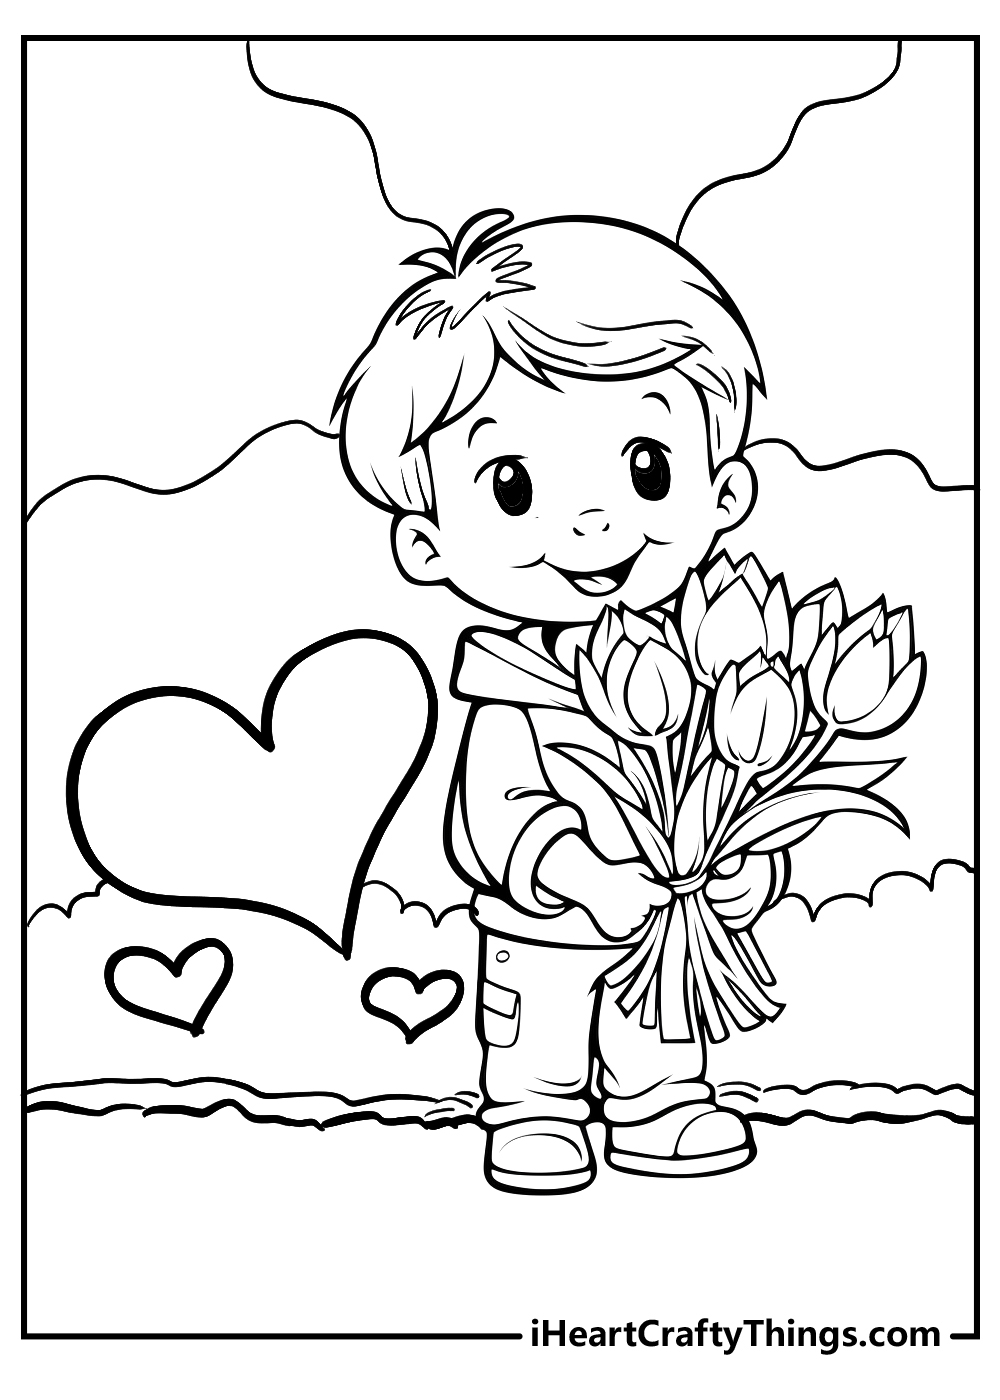 kindness coloring pages for kids